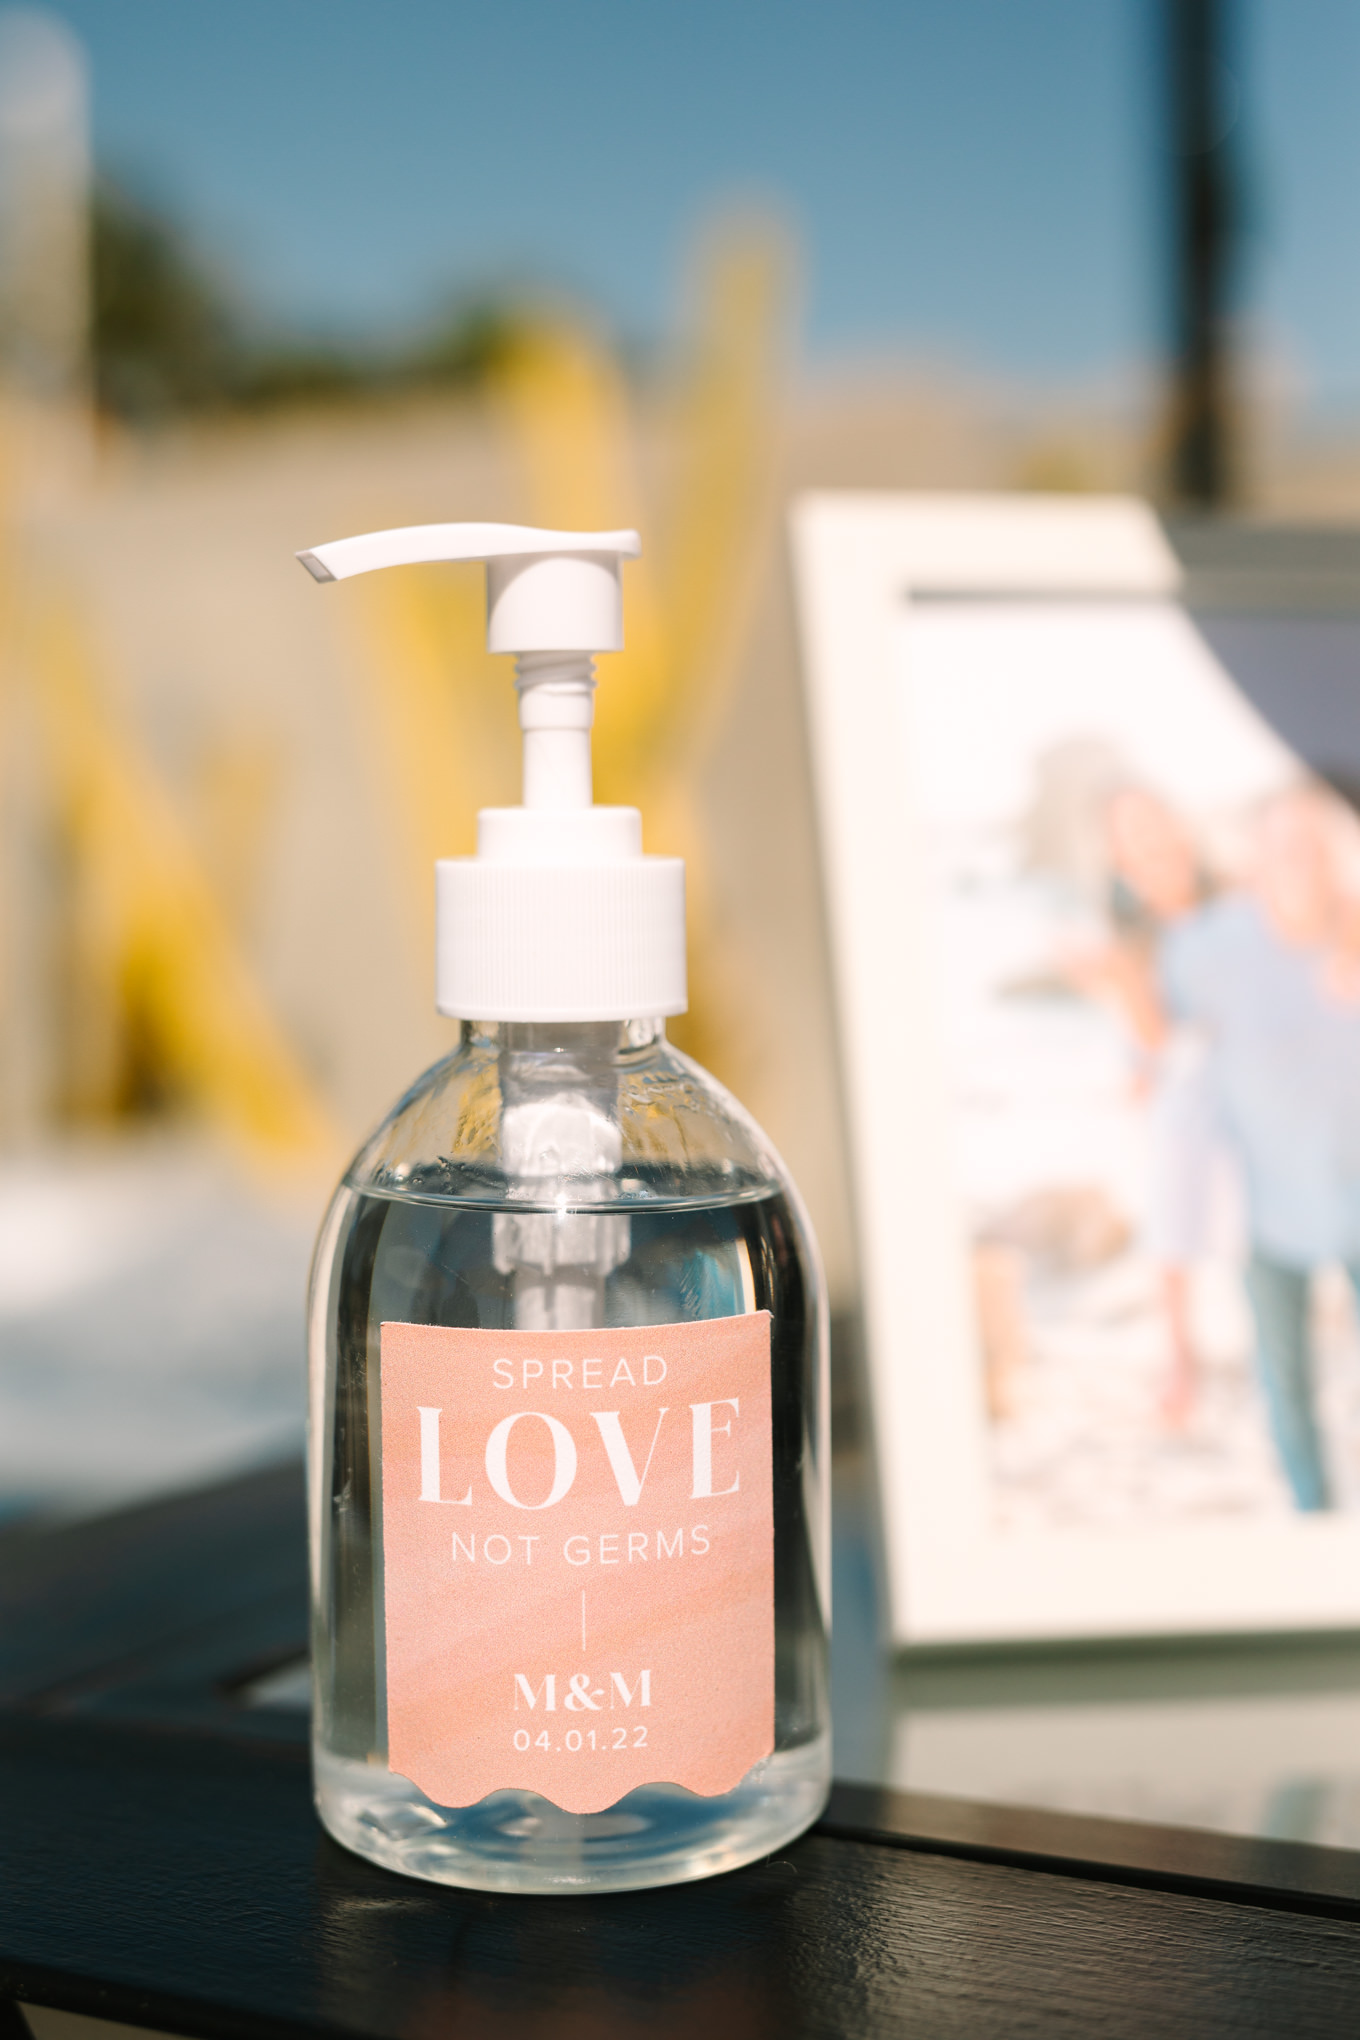 Custom hand sanitizer at cocktail hour | Pink and orange Lautner Compound wedding | Colorful Palm Springs wedding photography | #palmspringsphotographer #palmspringswedding #lautnercompound #southerncaliforniawedding  Source: Mary Costa Photography | Los Angeles